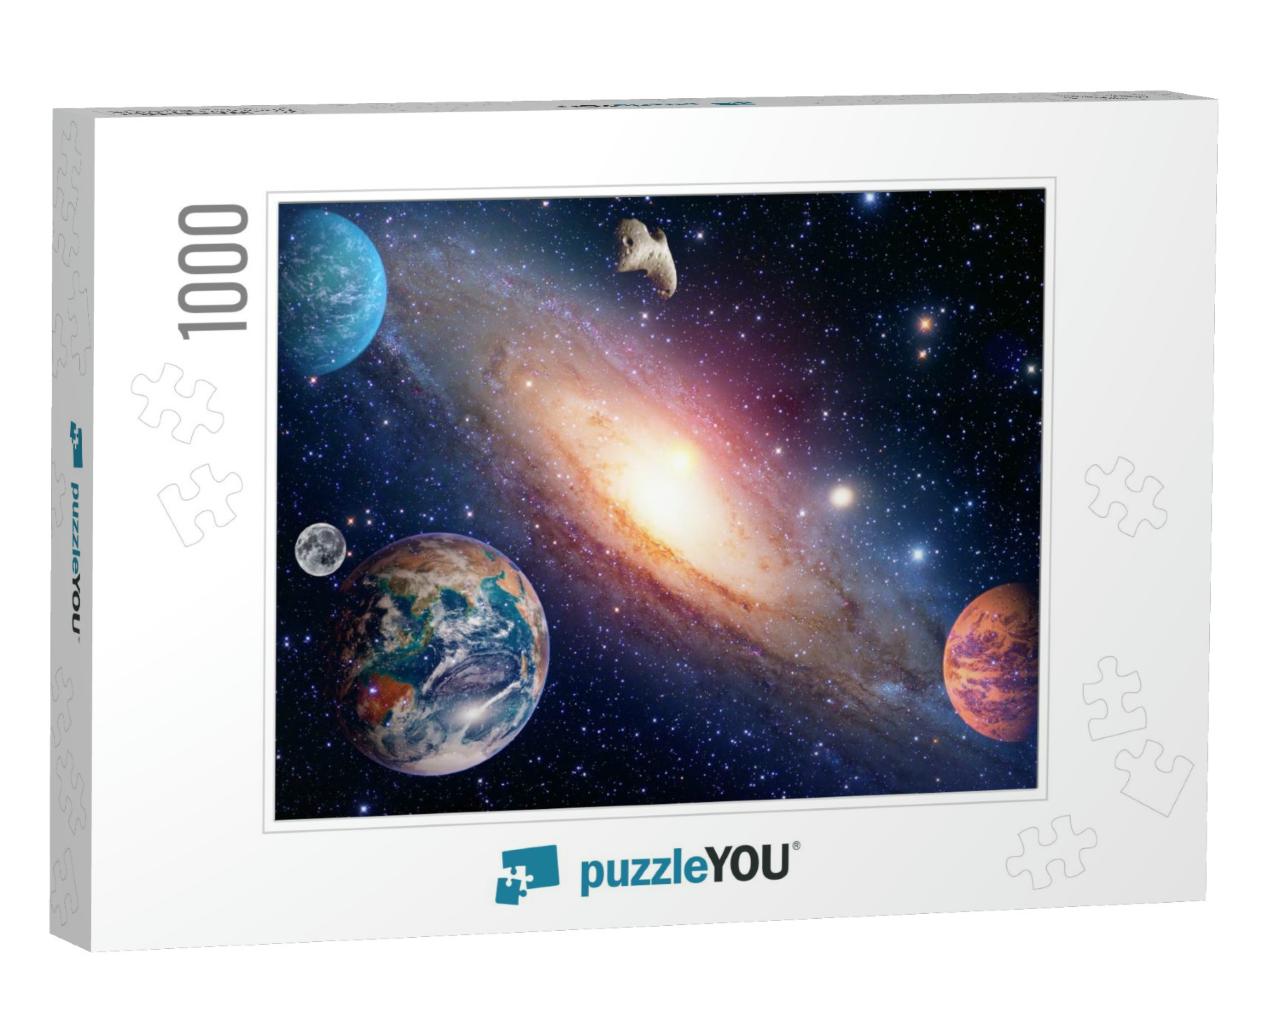 Astrology Astronomy Earth Moon Space Big Bang Solar Syste... Jigsaw Puzzle with 1000 pieces